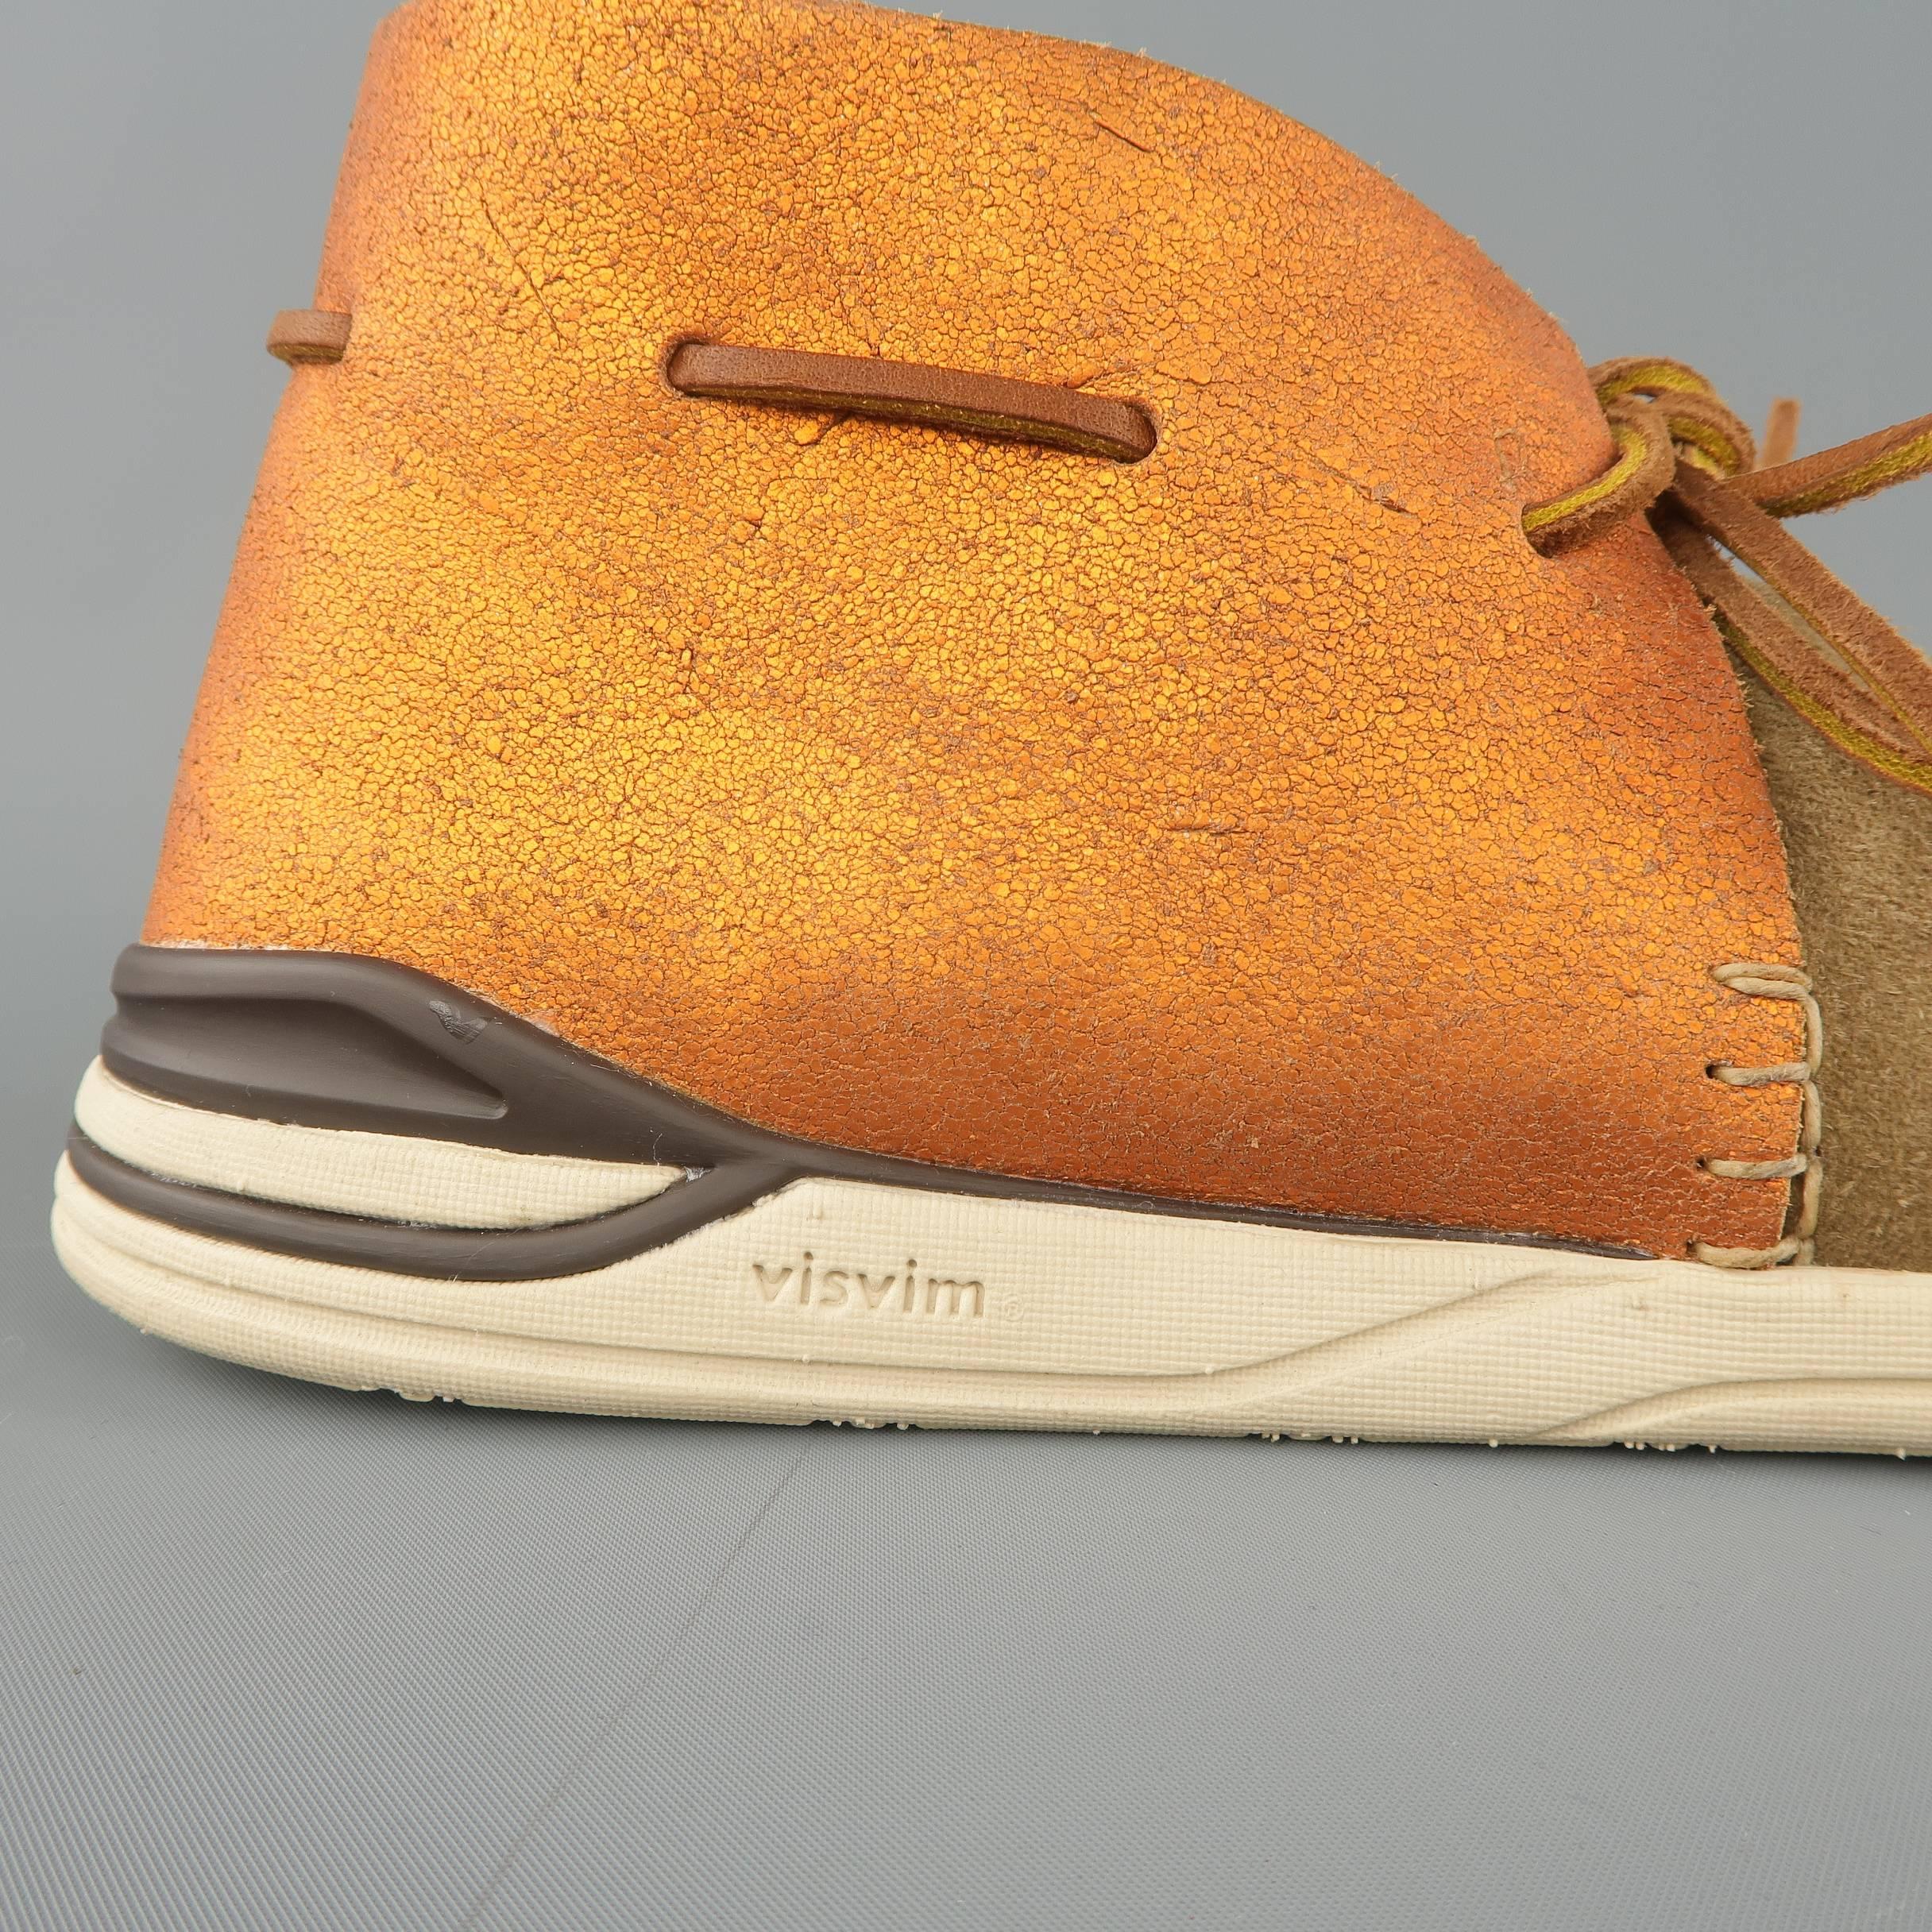 VISVIM sneaker boots come in light taupe mock folk suede with perforated sides, beige rubber sole, and metallic orange panel with woven tie. Made in Japan.
 
New with Box.
Marked: US 9.5
 
Outsole: 11.5 x 4 in.